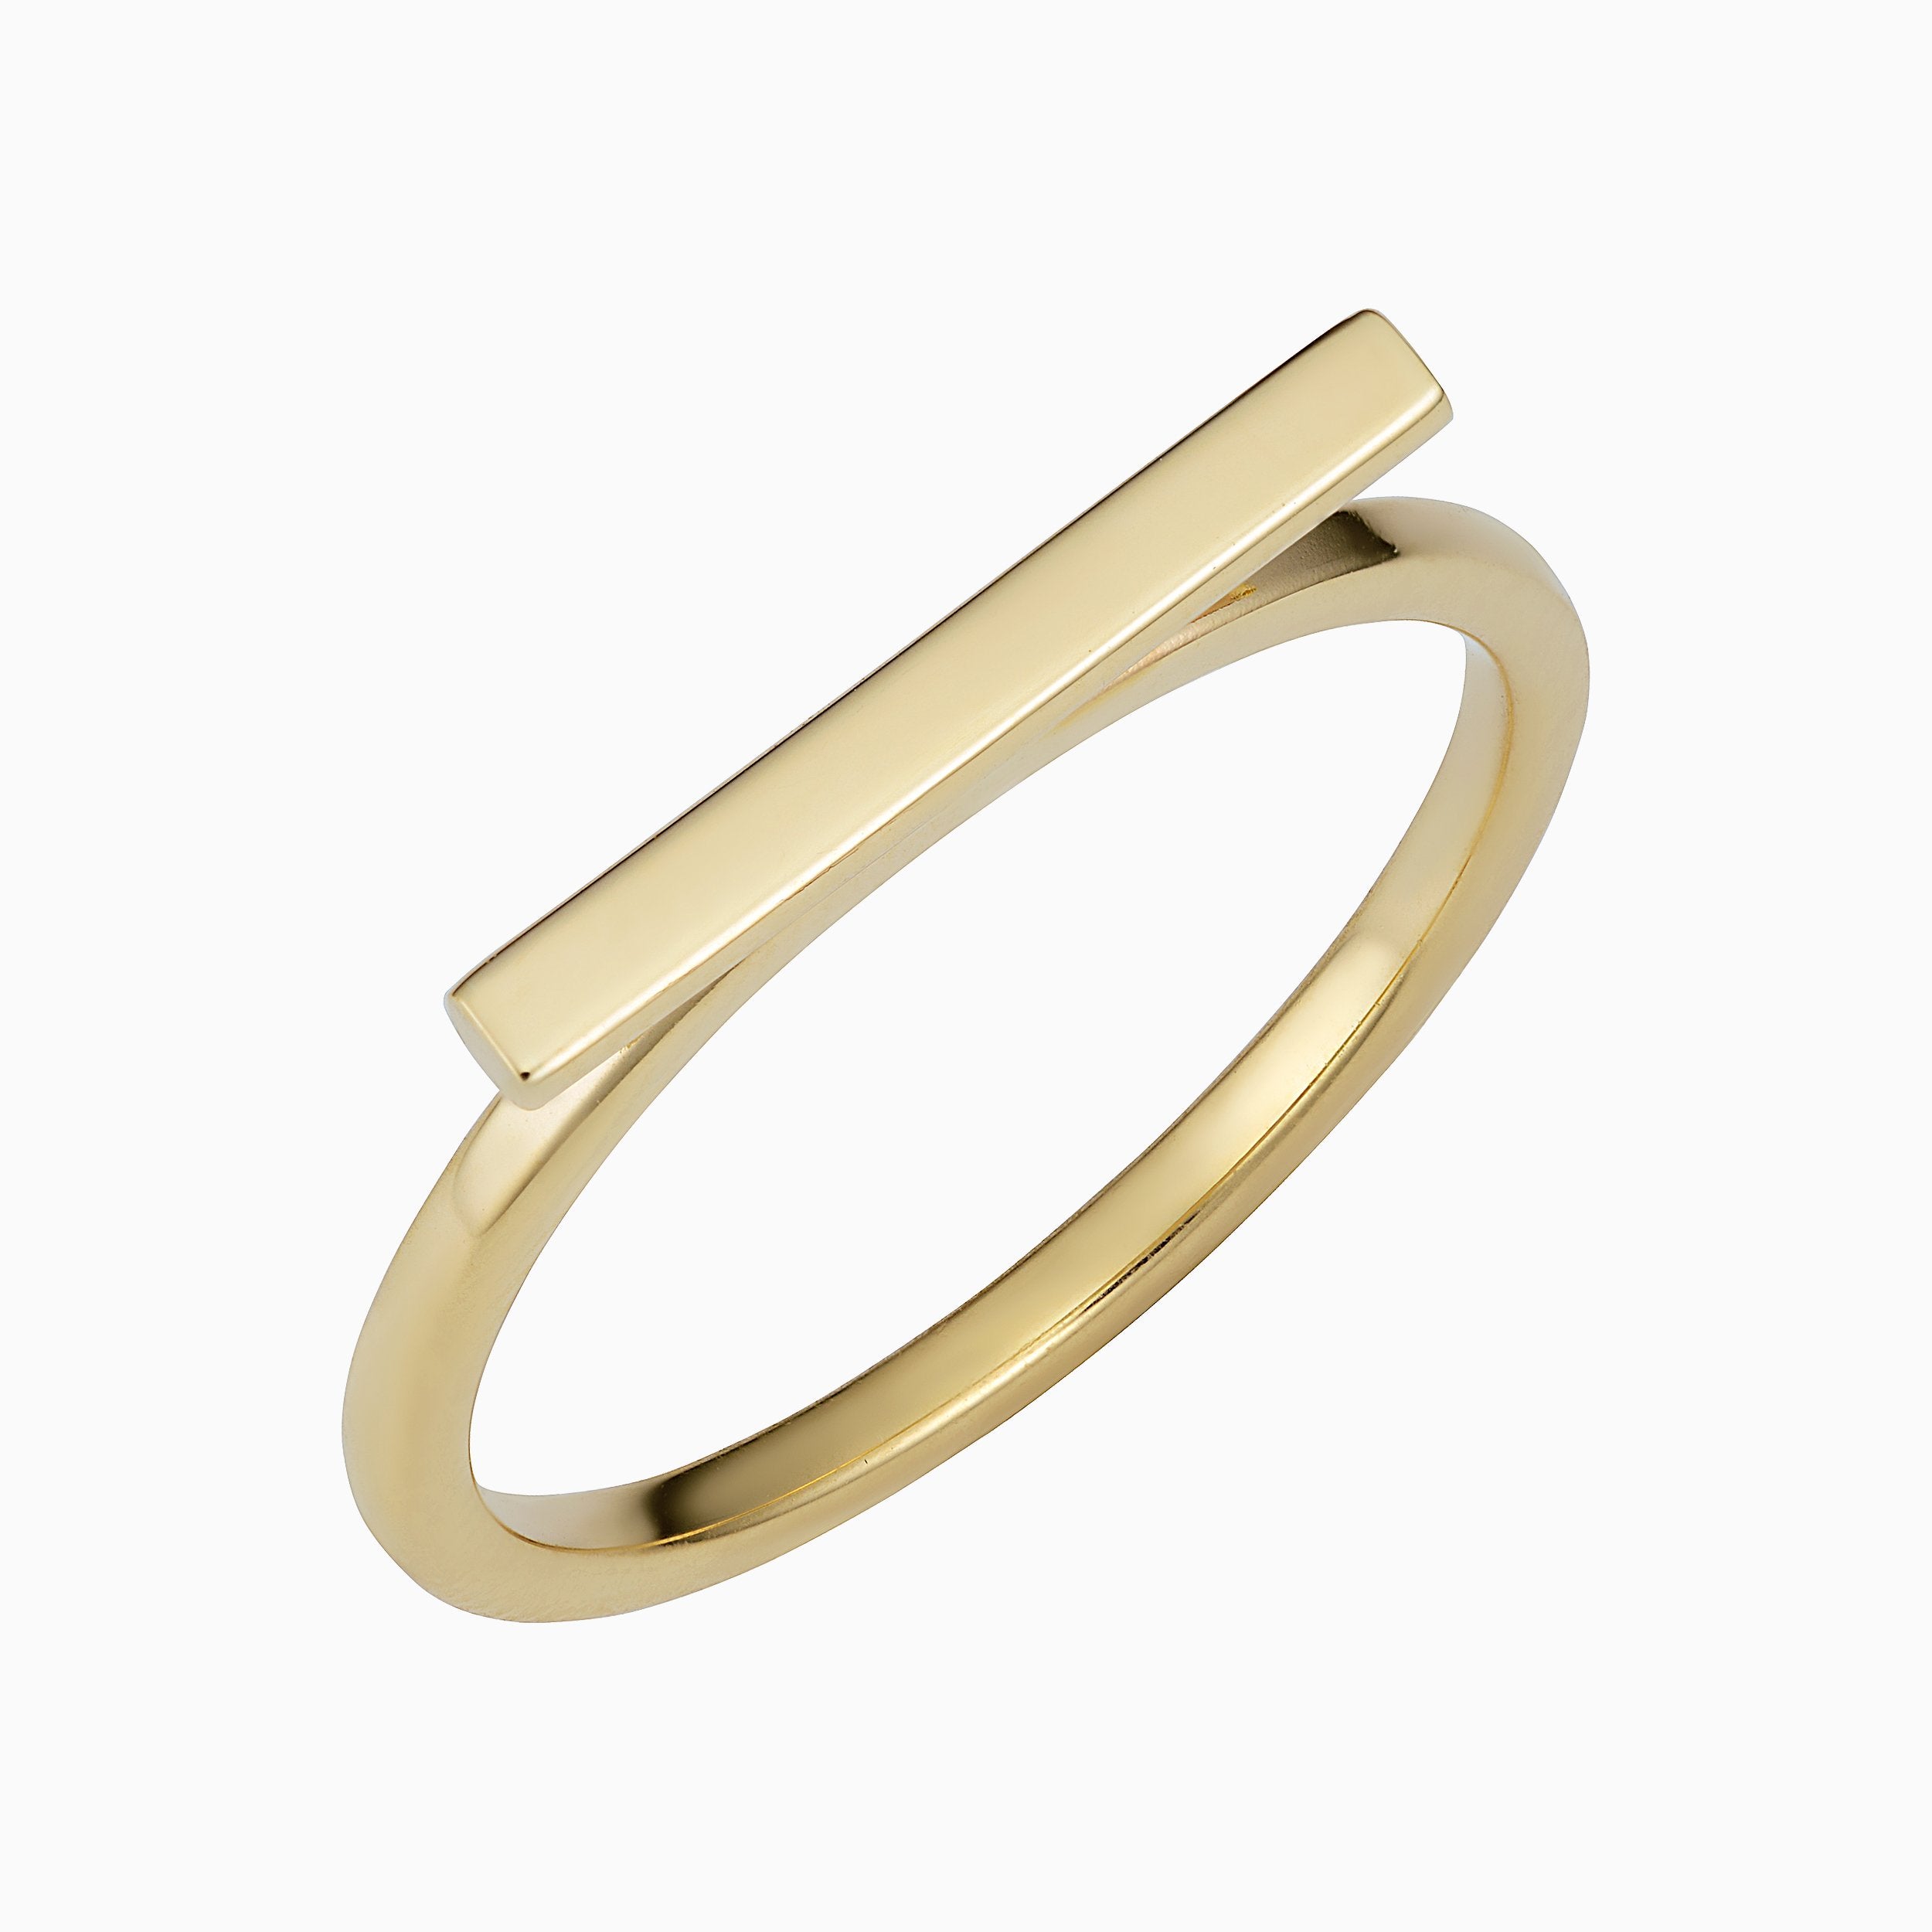 Plain Gold Bar Ring for Women. Womens Open Ring With a Brushed